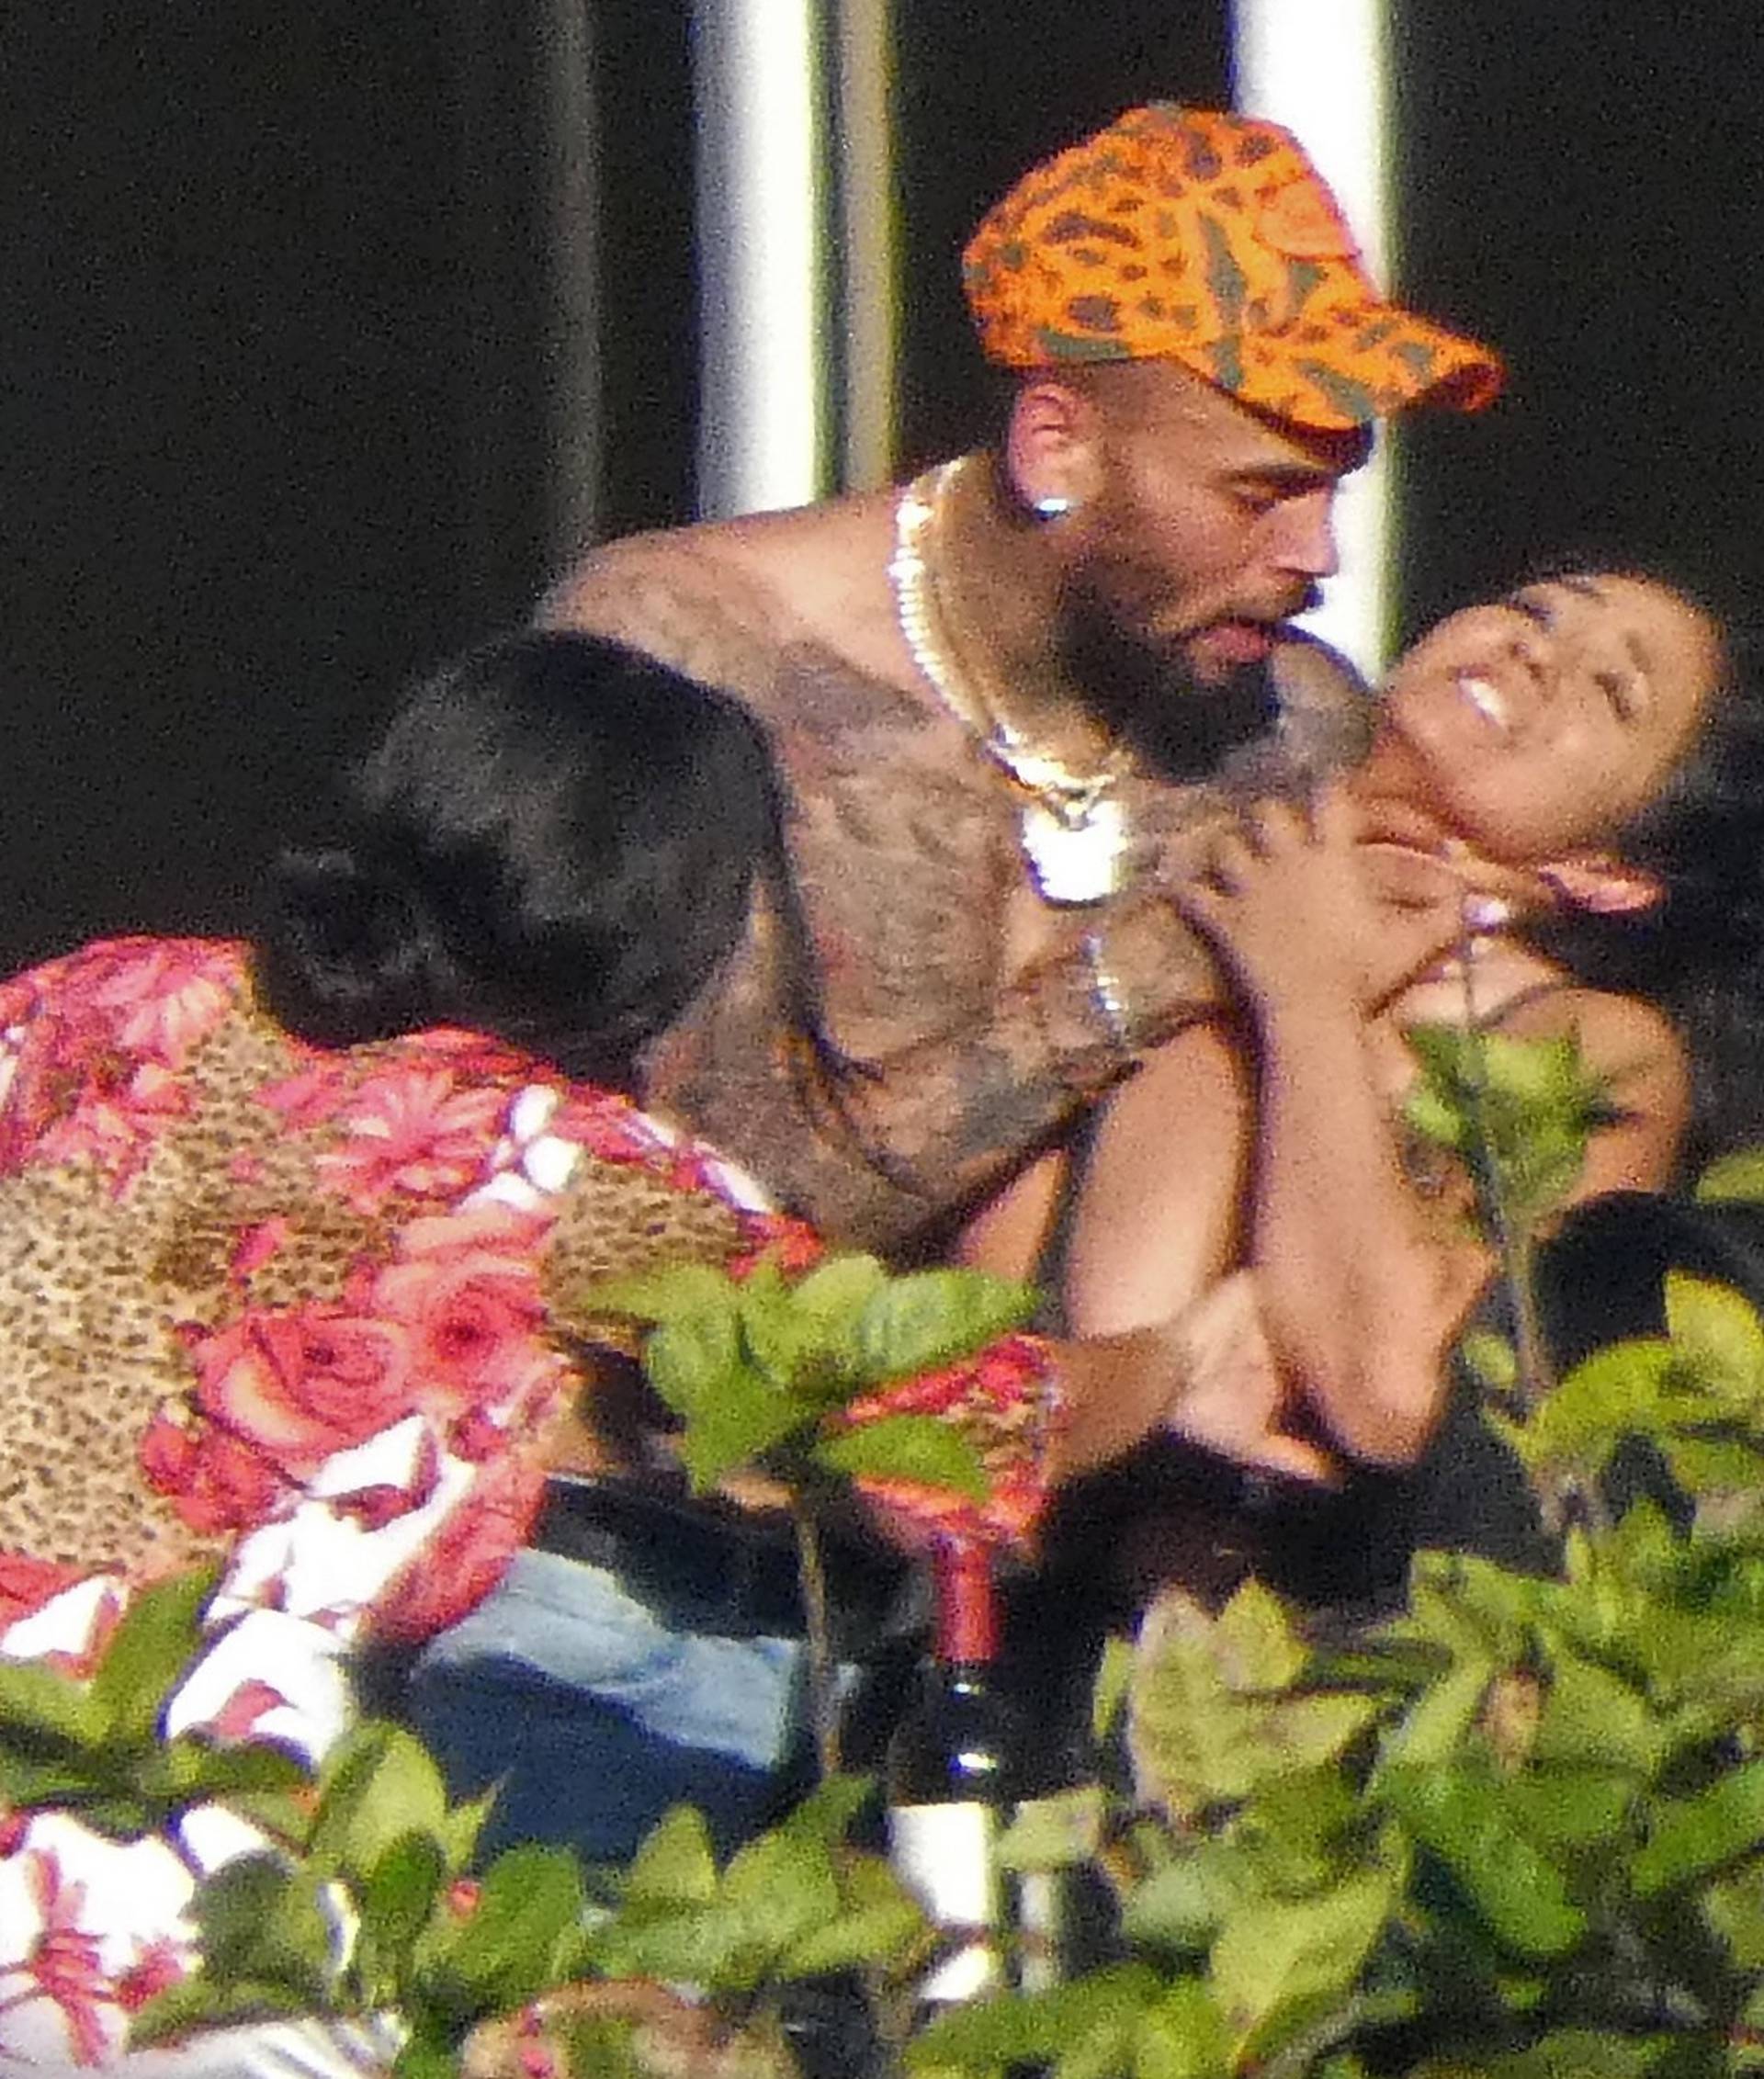 EXCLUSIVE: Chris Brown Puts Hands on Woman's Neck But They Say it's Just Horseplay